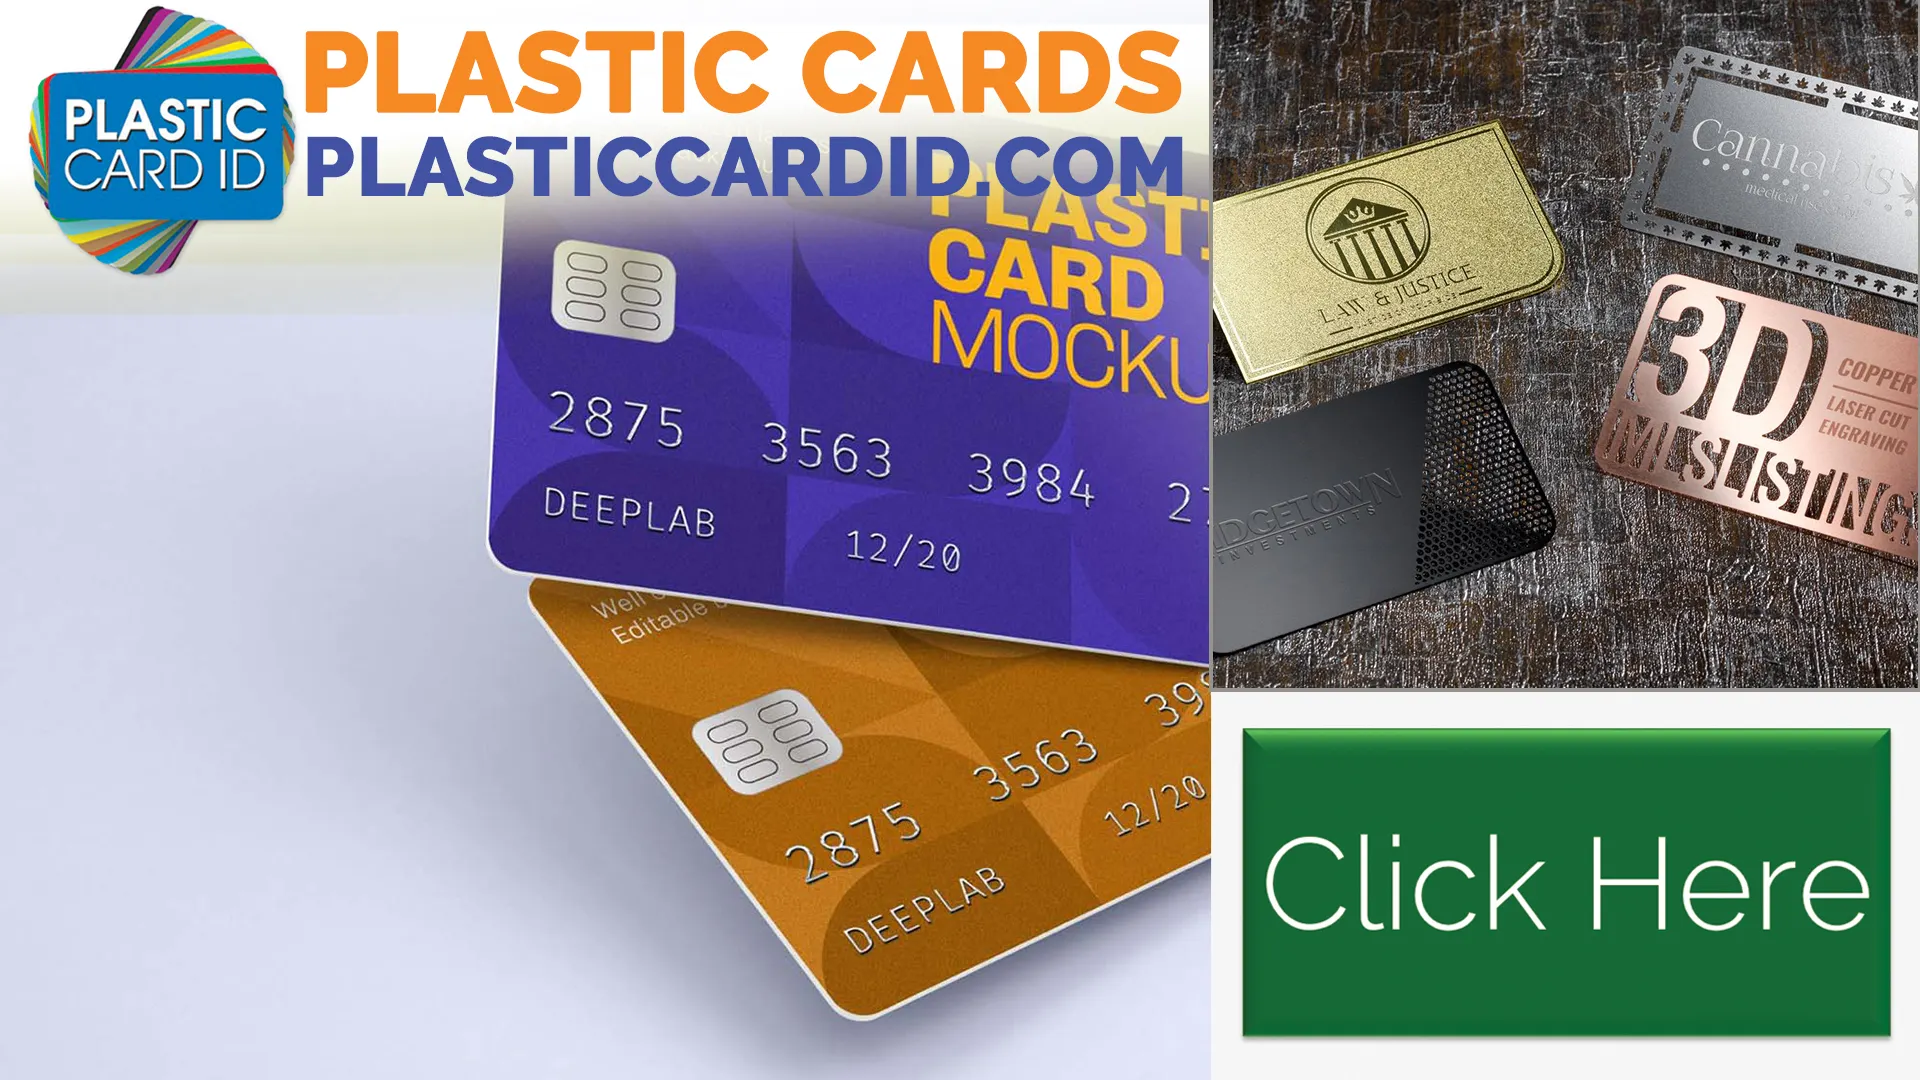 Flexible Solutions for Your Bulk Plastic Card Needs